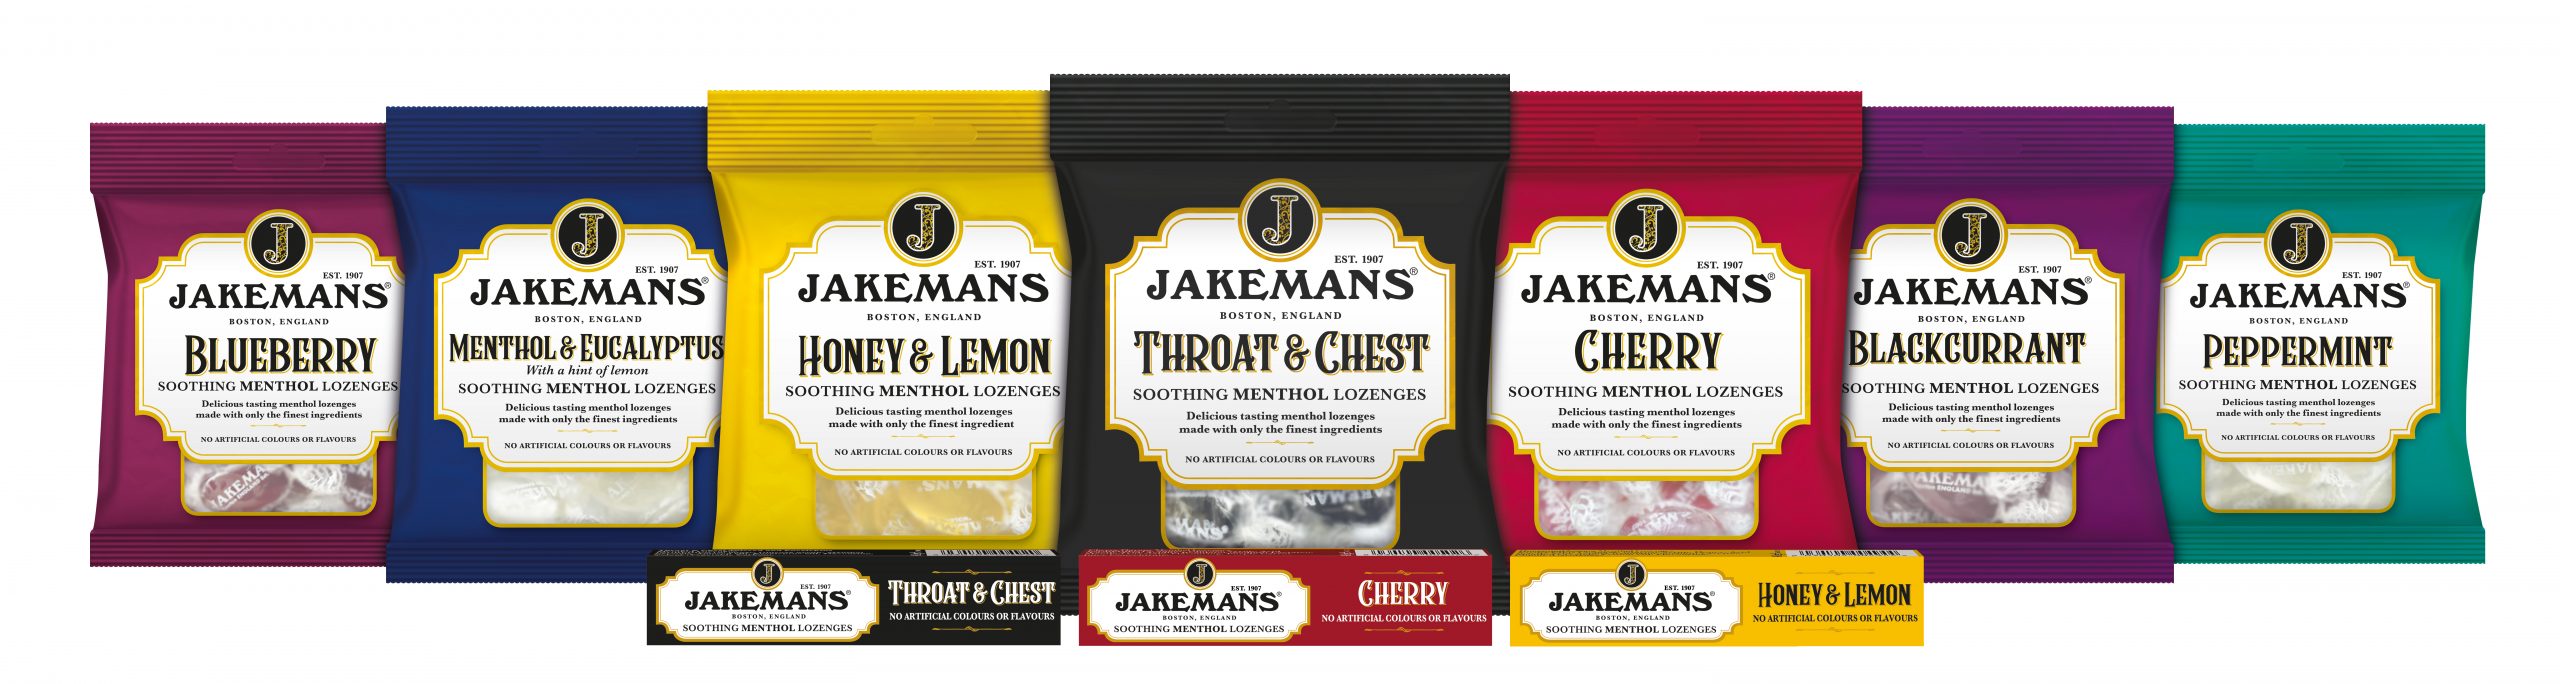 Jakemans’ new packaging hits the sweet spot